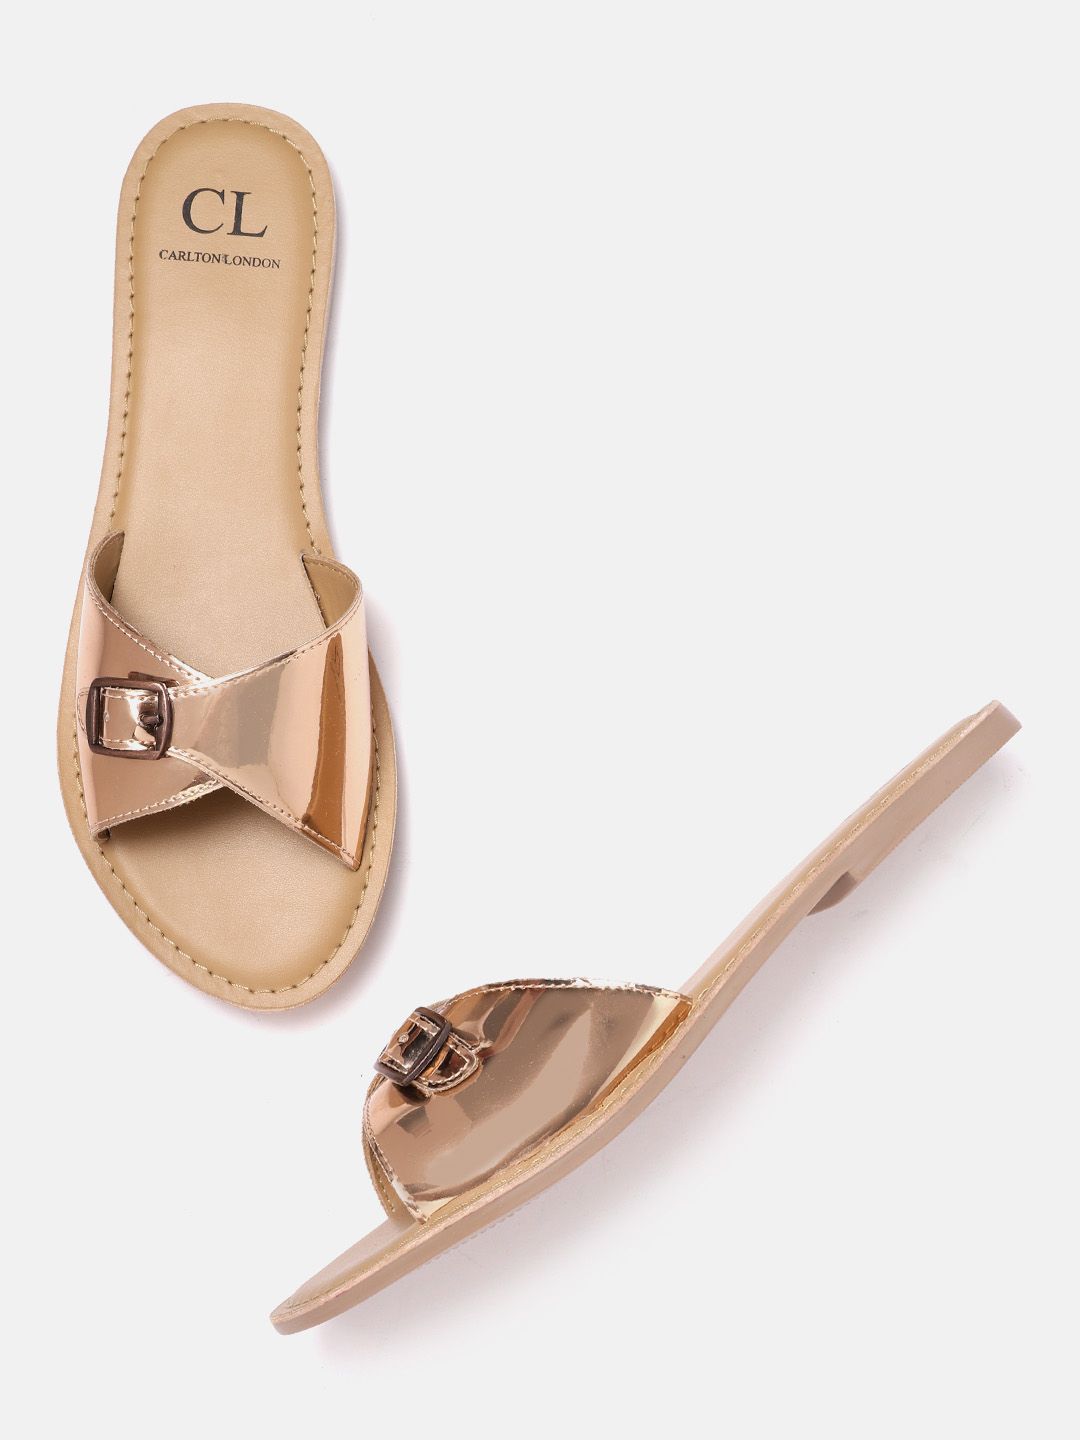 Carlton London Women Rose Gold-Toned Glossy Finish Open Toe Flats with Buckles Price in India